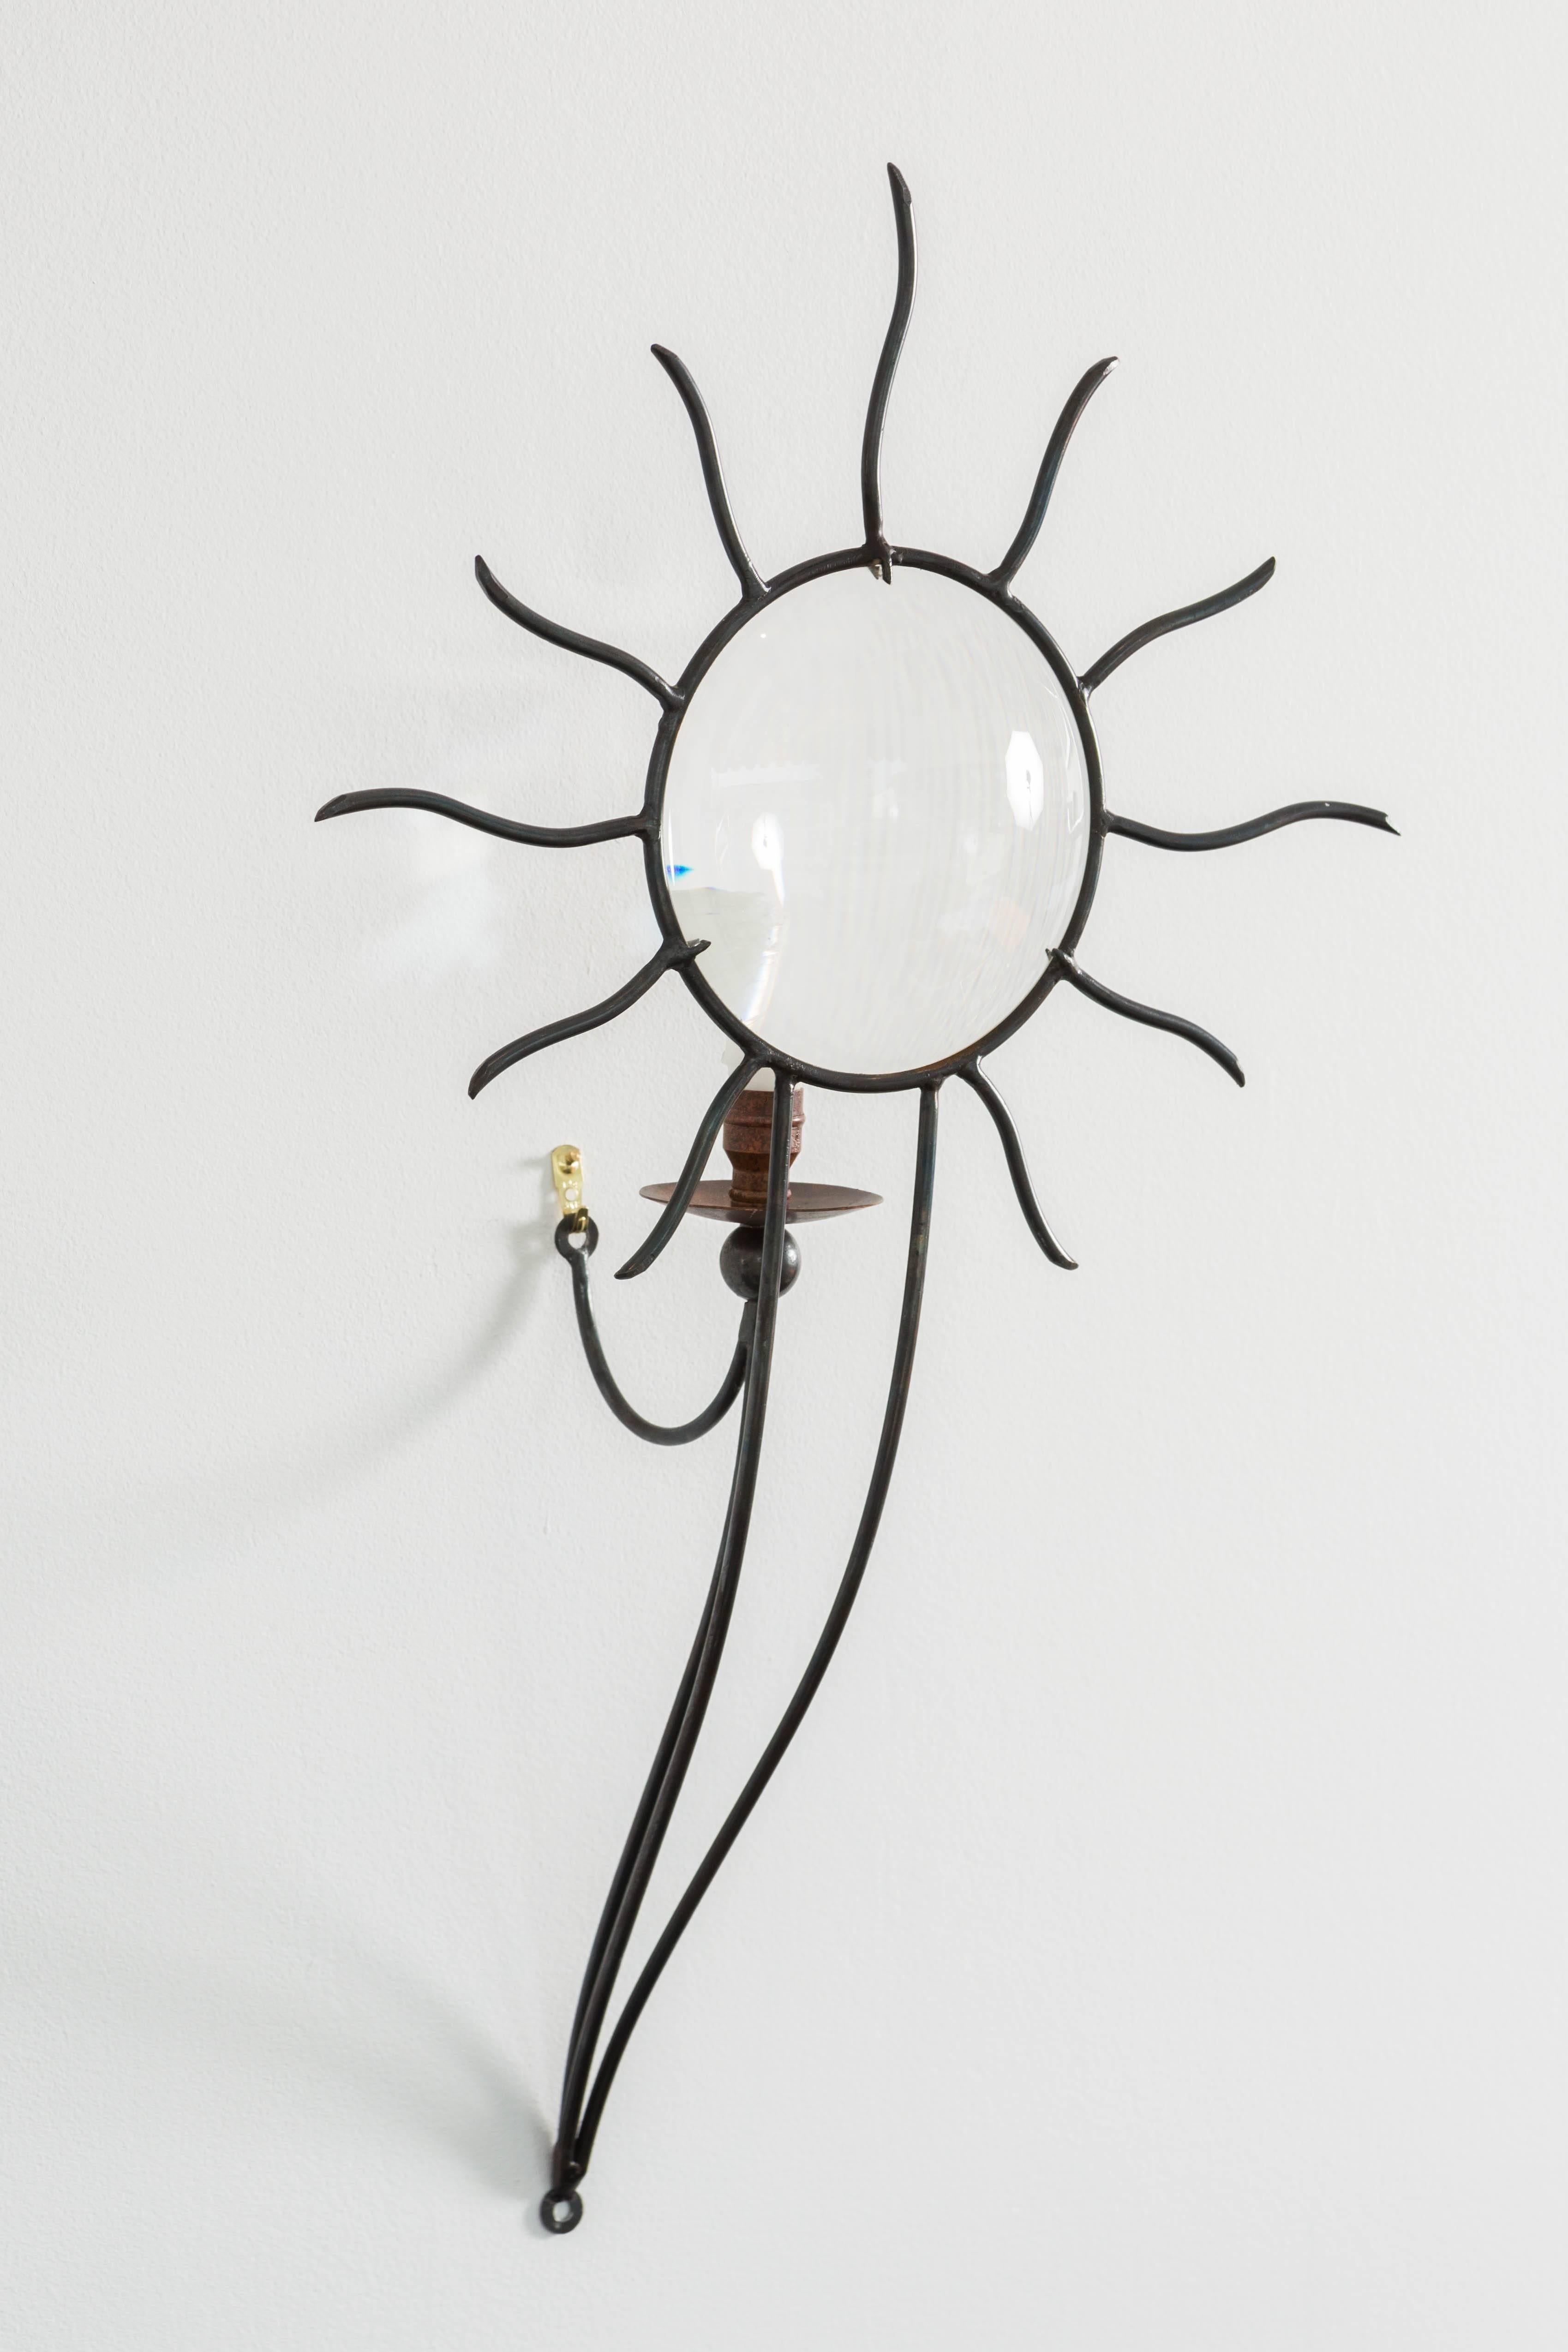 Late 20th century pair of thick-walled magnifying glass sconces in wrought iron forming a sunburst with brass socket and bobeche mounted on three supporting rods.`
Designed 1992 by André Dubreuil (1951, French).